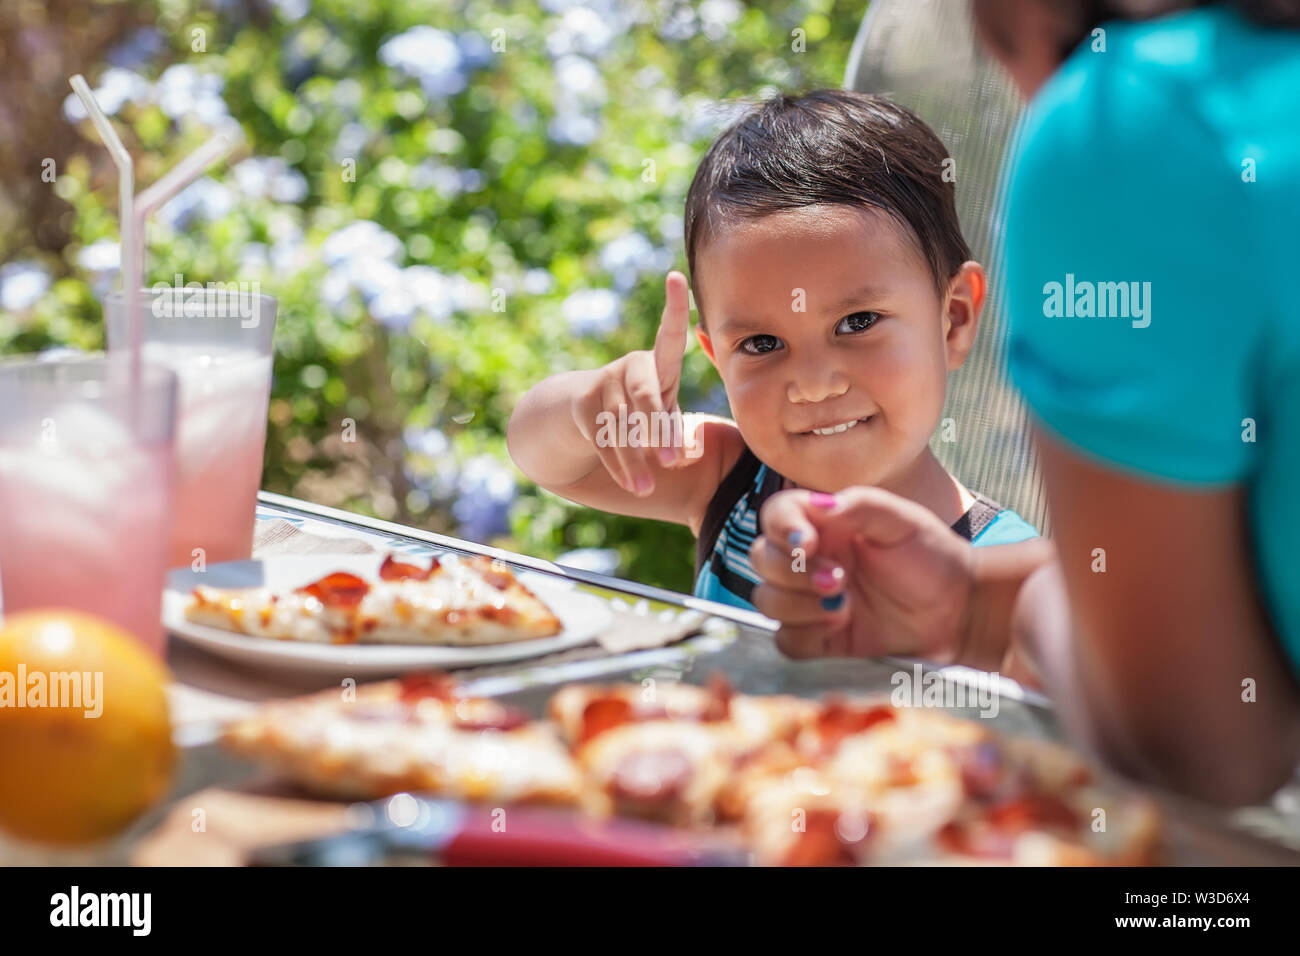 Young brother loves eating cheese pizza for lunch in an outdoor backyard patio with his older sister, he gestures number one with finger. Stock Photo